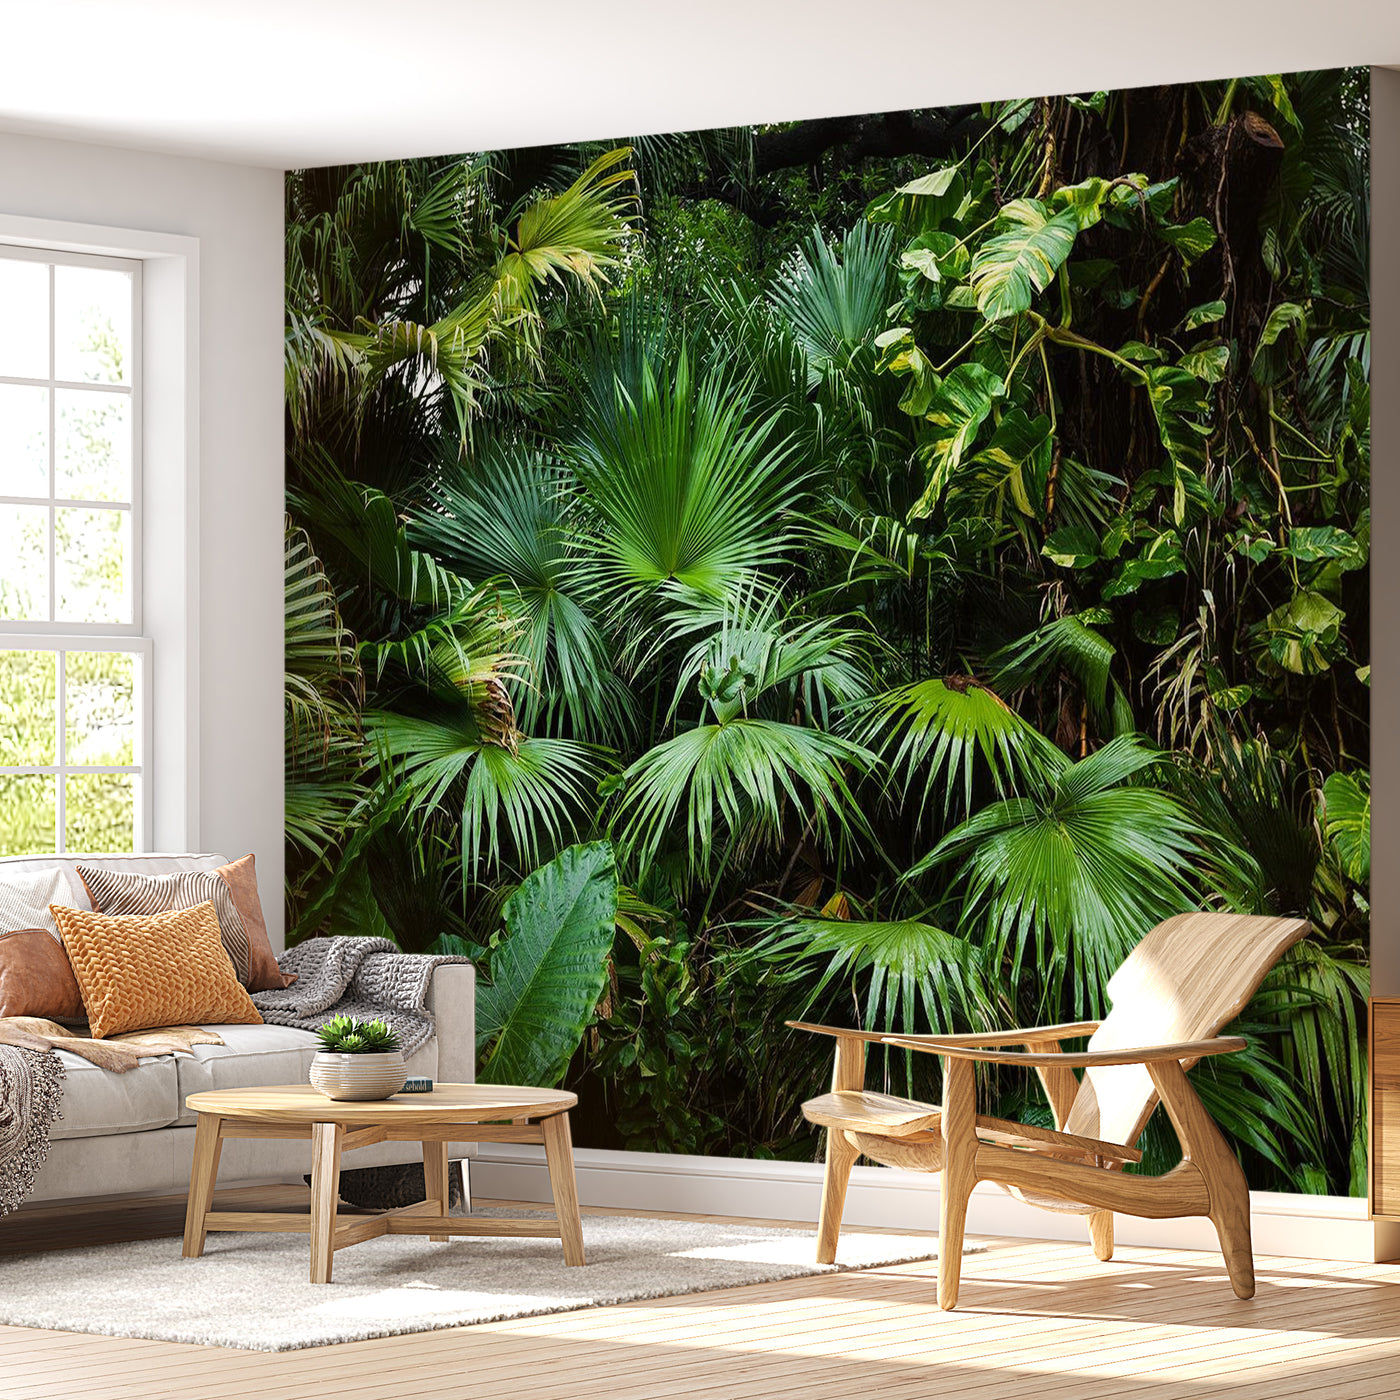 Peel & Stick Forest Wall Mural - Sunny Jungle - Removable Wall Decals